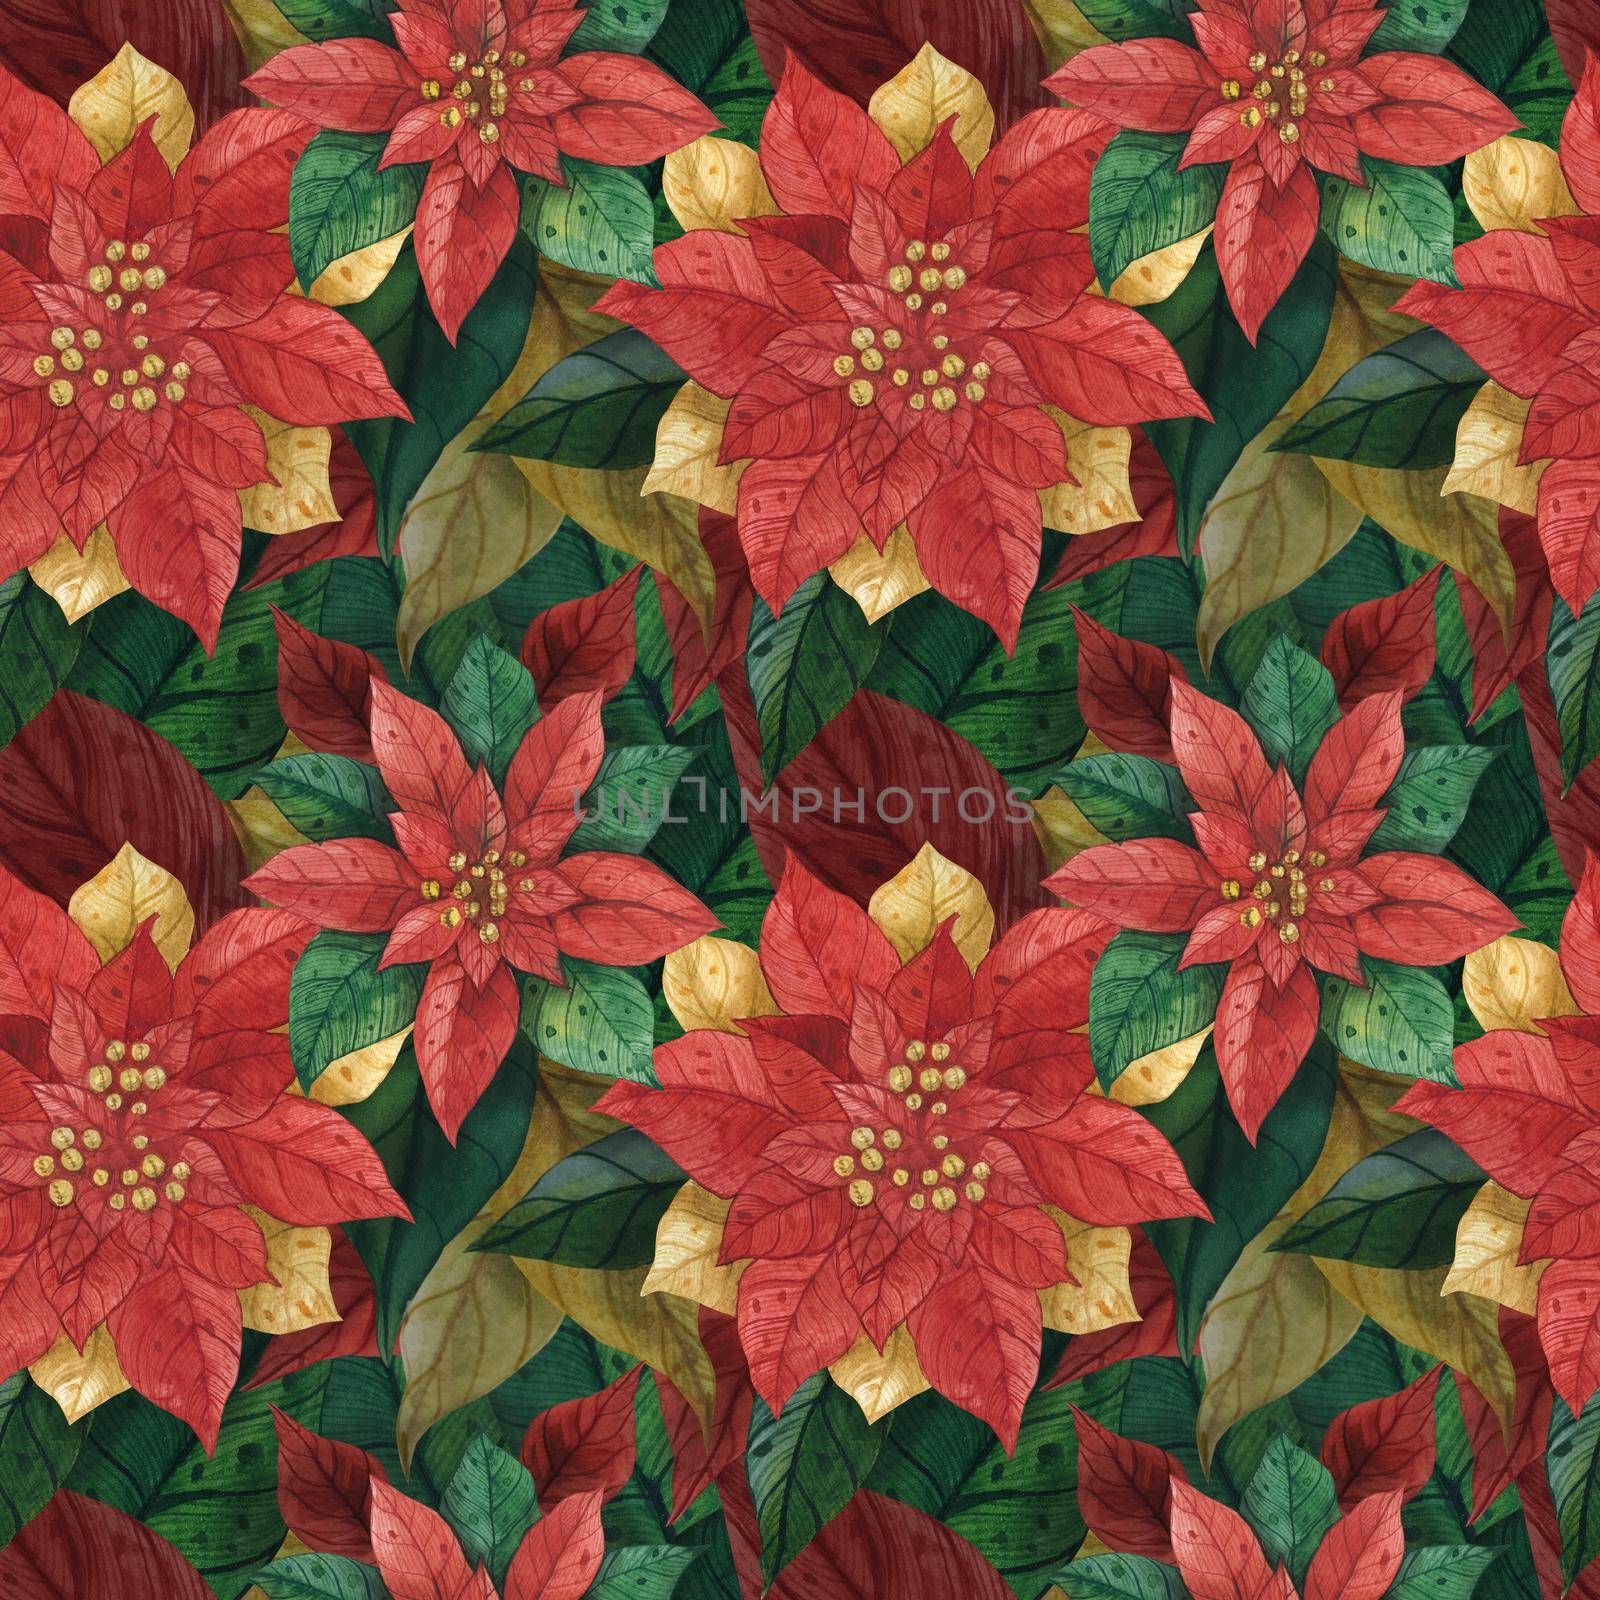 Christmas Star Poinsettia, watercolor seamless pattern, path included